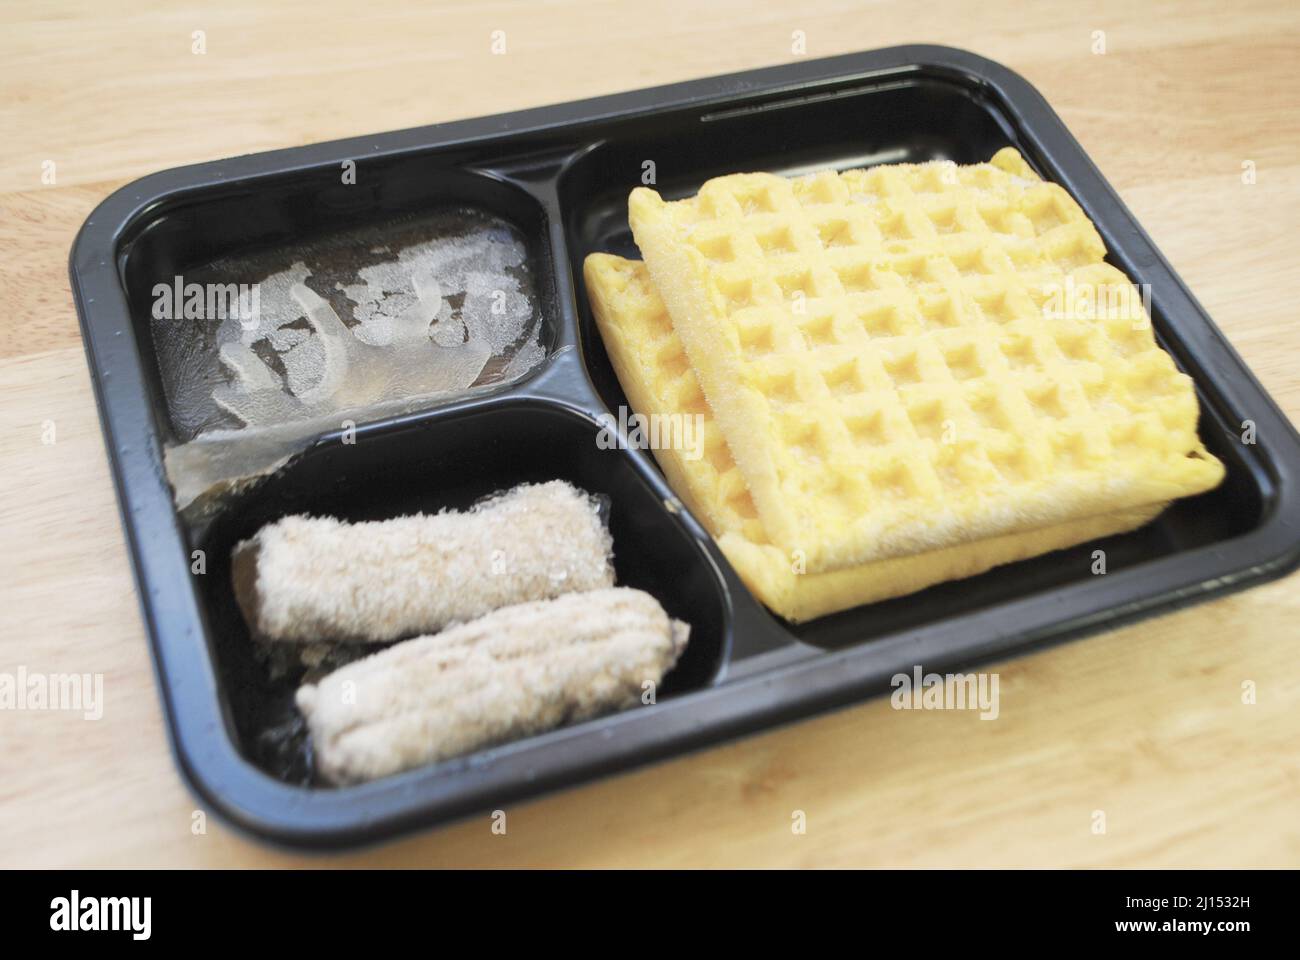 Frozen Microwavable Breakfast of Two Square Waffles Served with Sausage Links Stock Photo